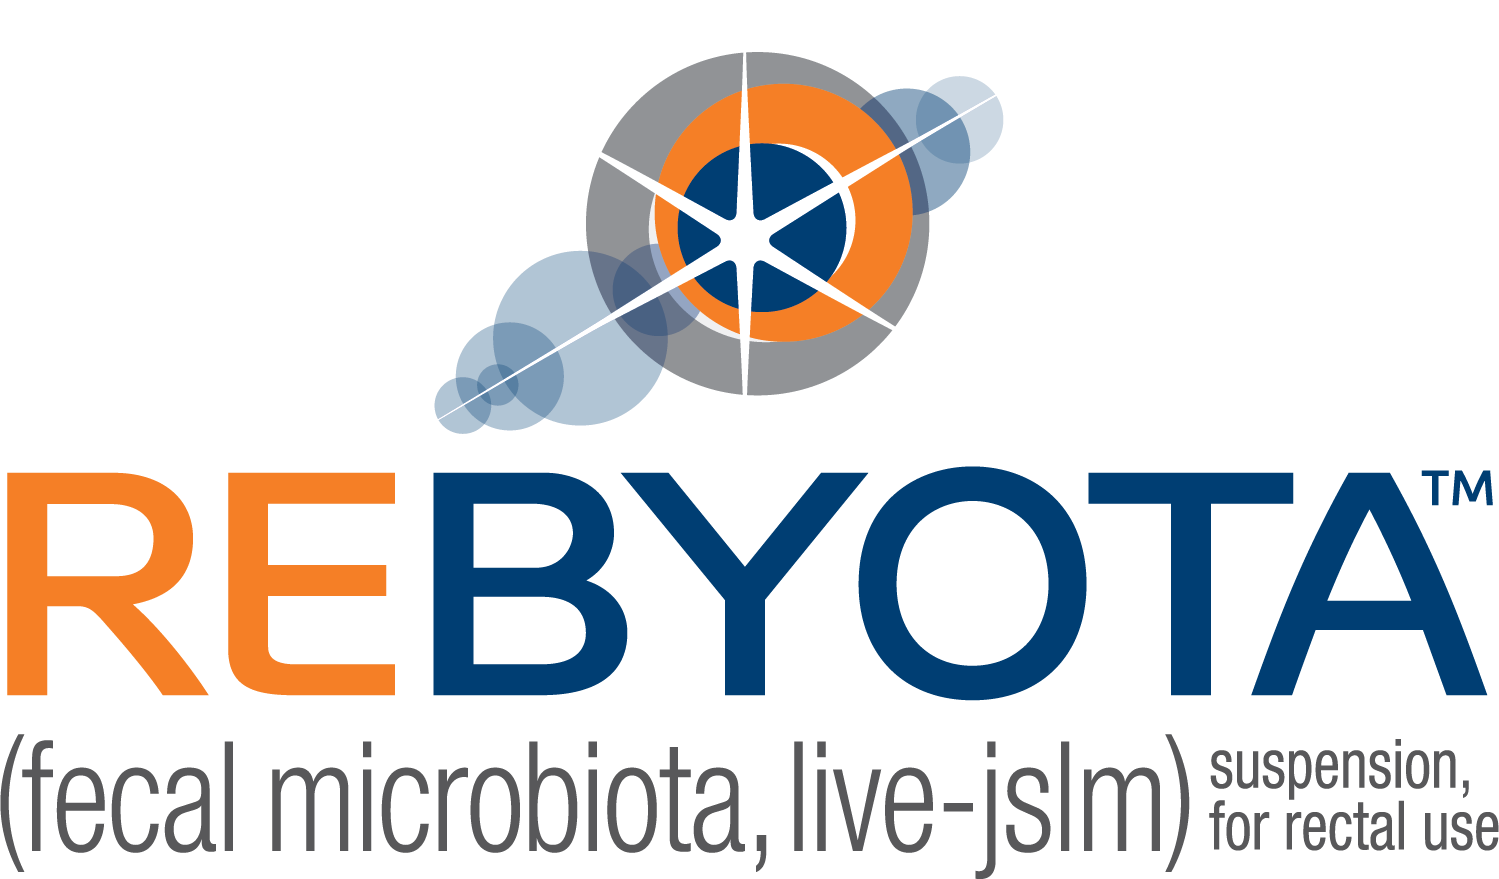 Largest Safety Evaluation of Microbiota-Based Therapeutic Reveals Rebyota's Positive Profile